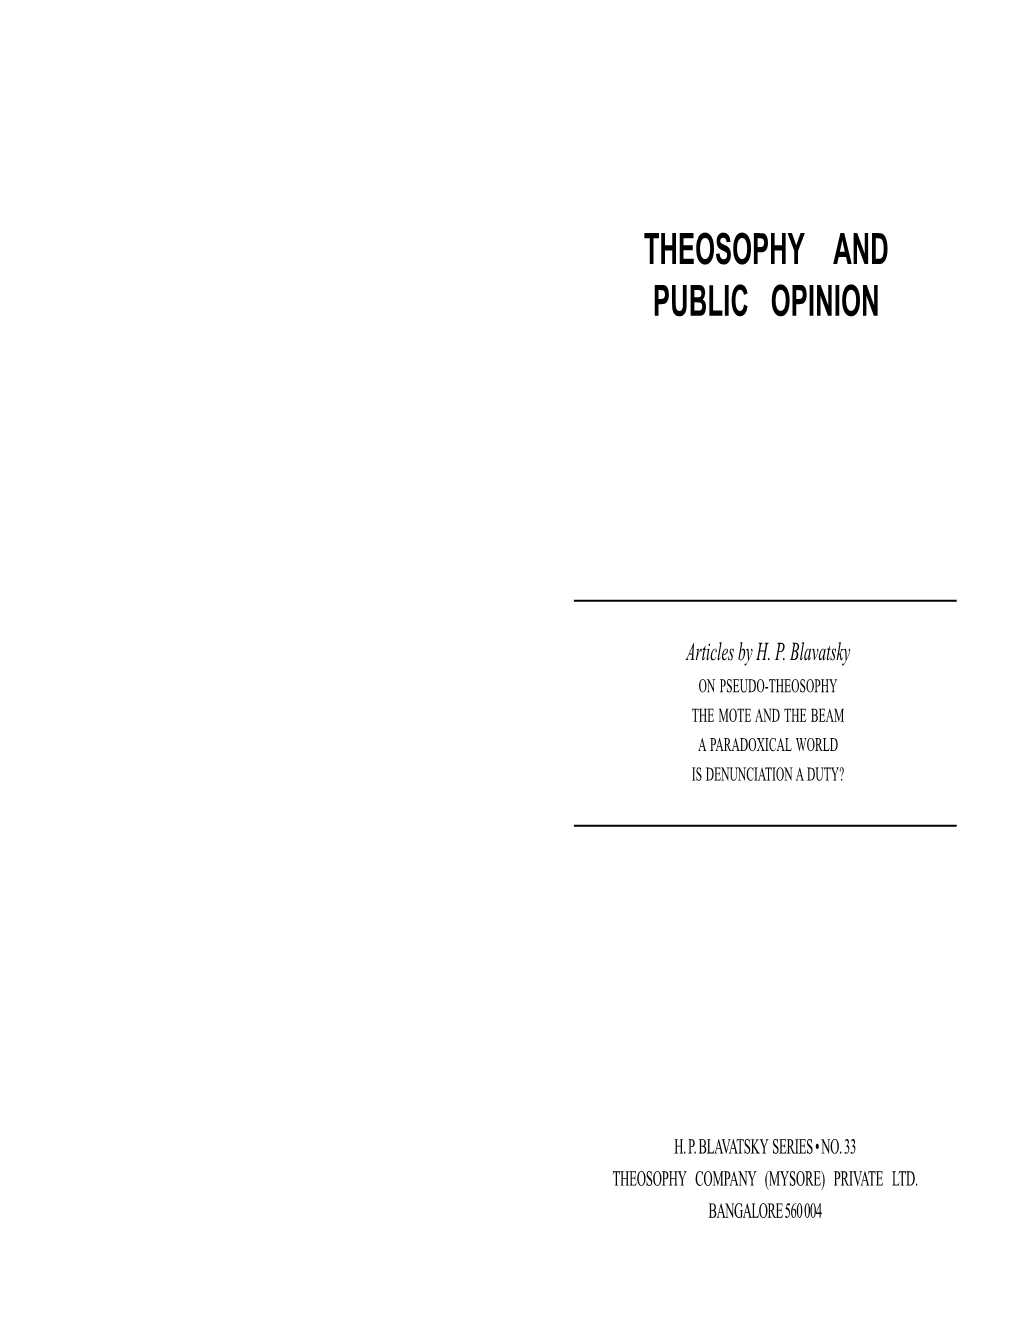 Theosophy and Public Opinion